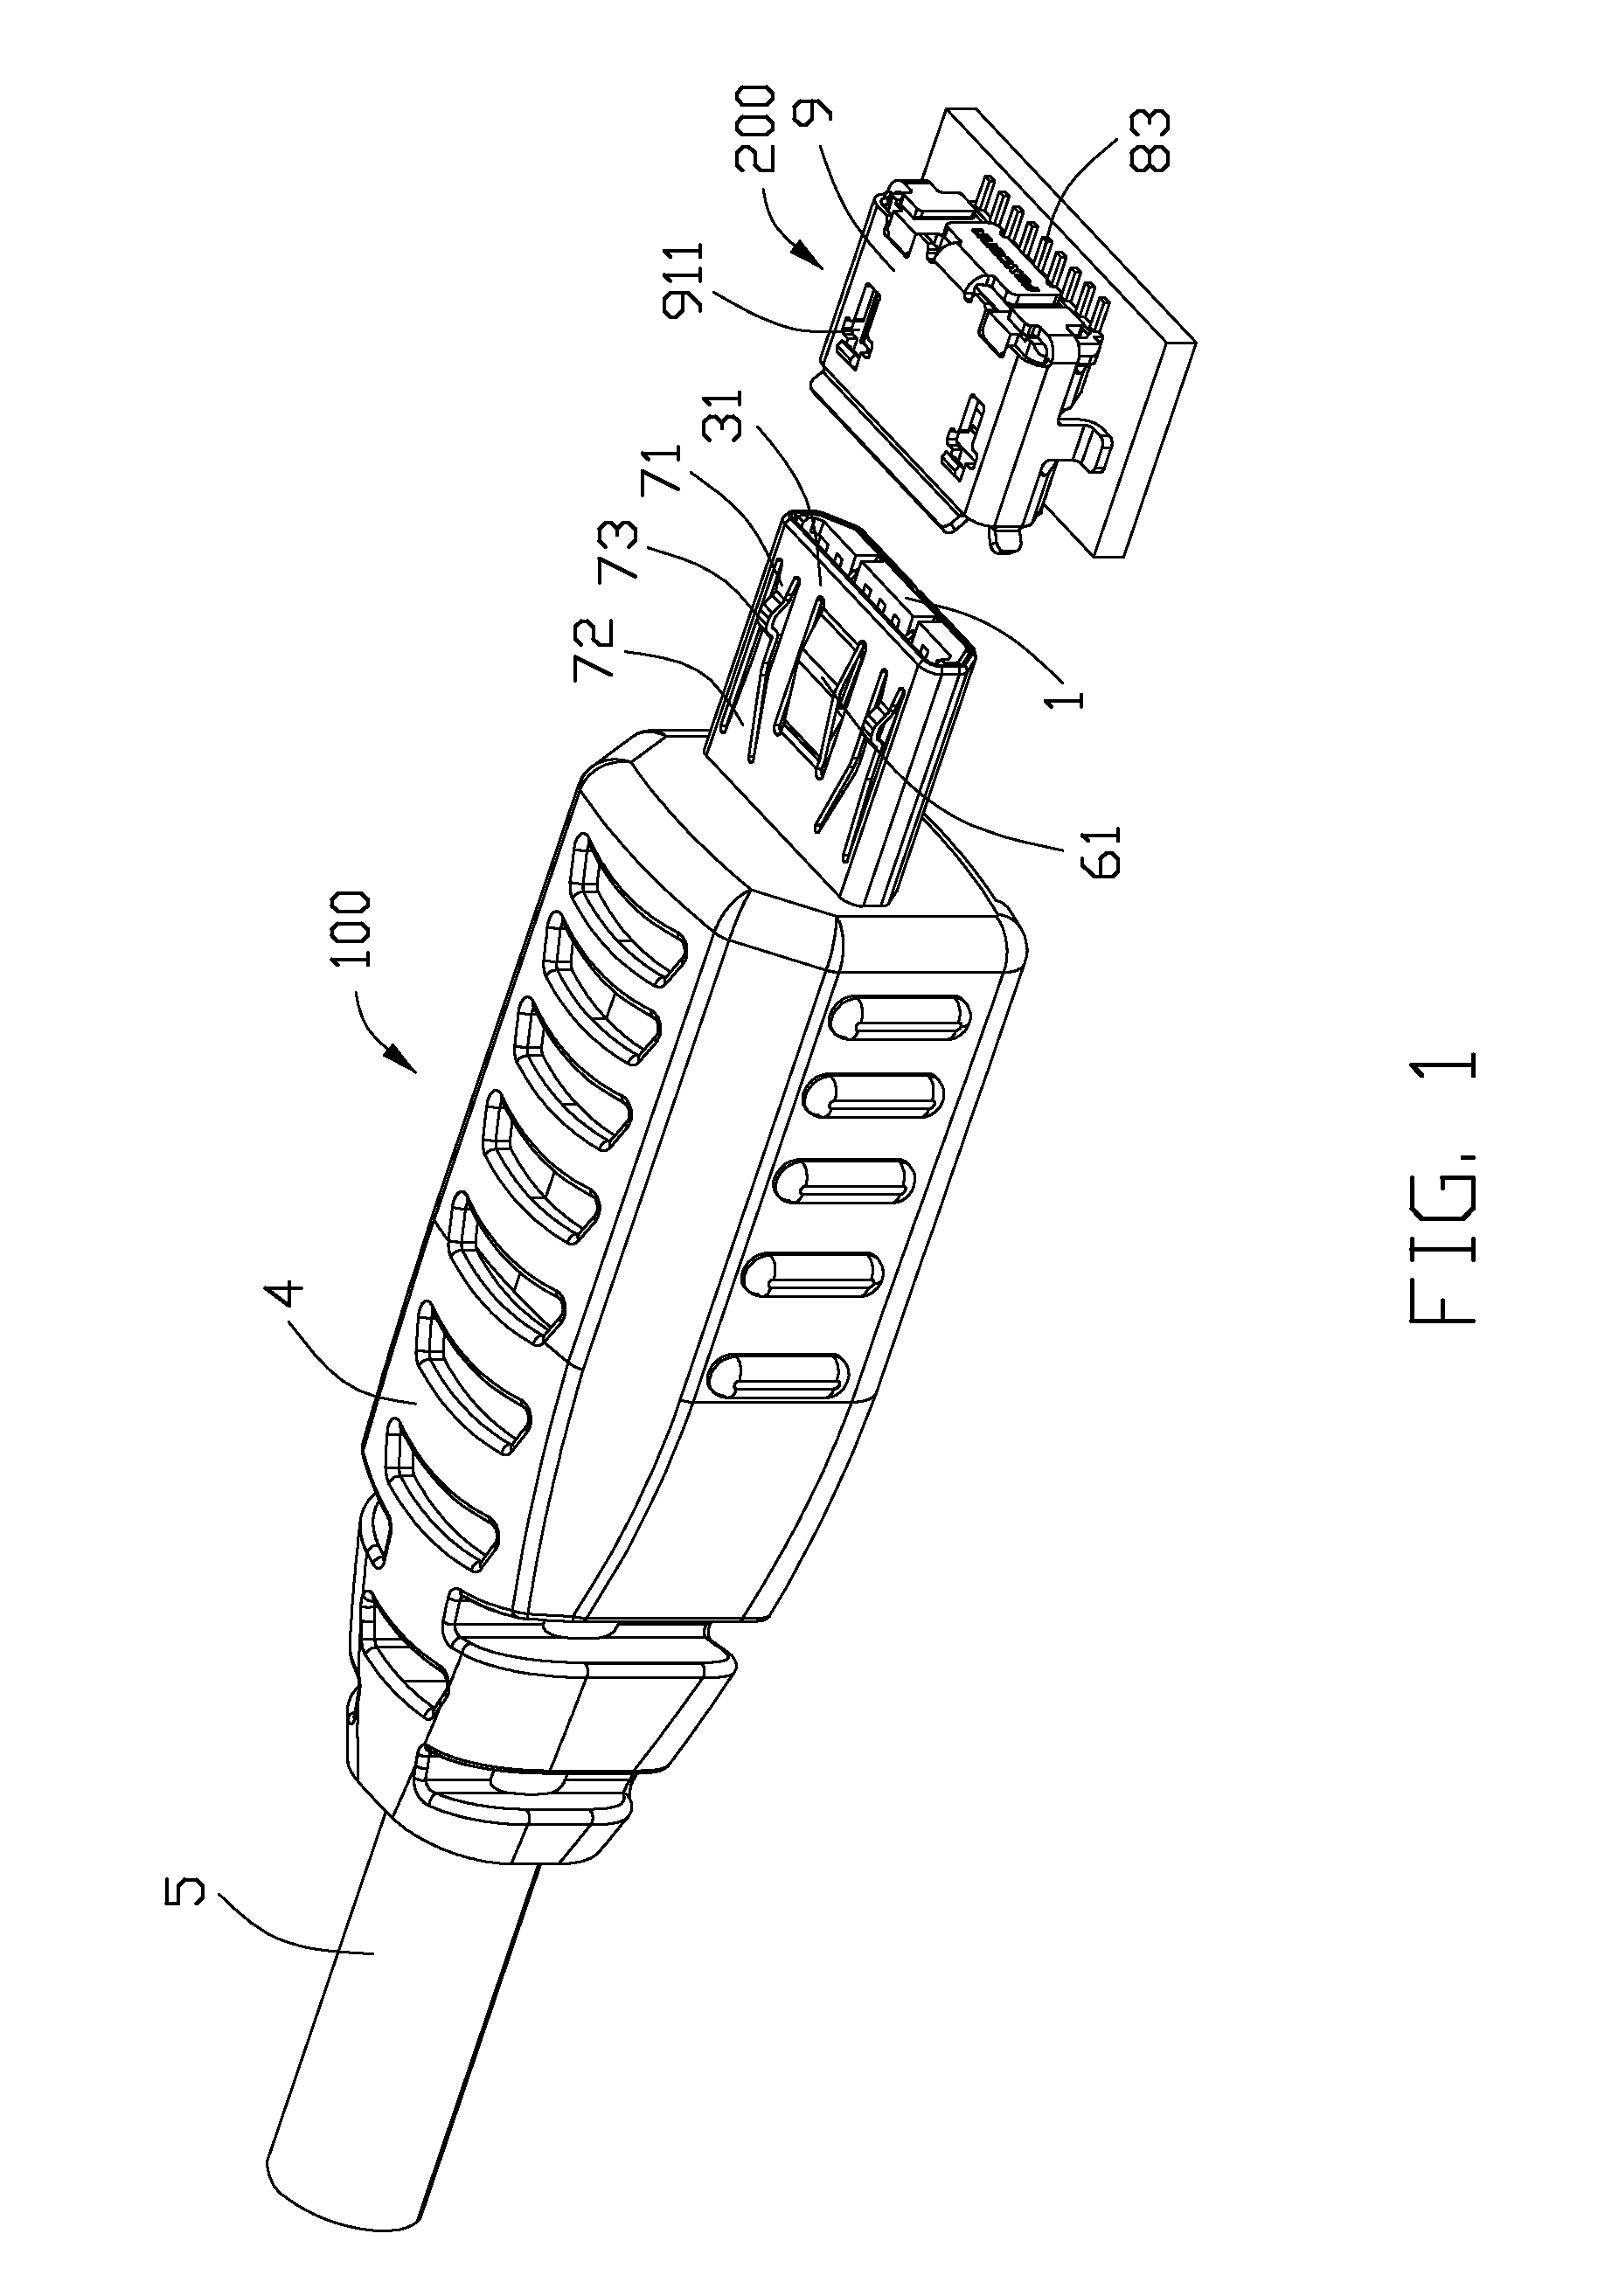 Electrical connector with resilient arm configured in fixed ended beam manner formed on metal shell